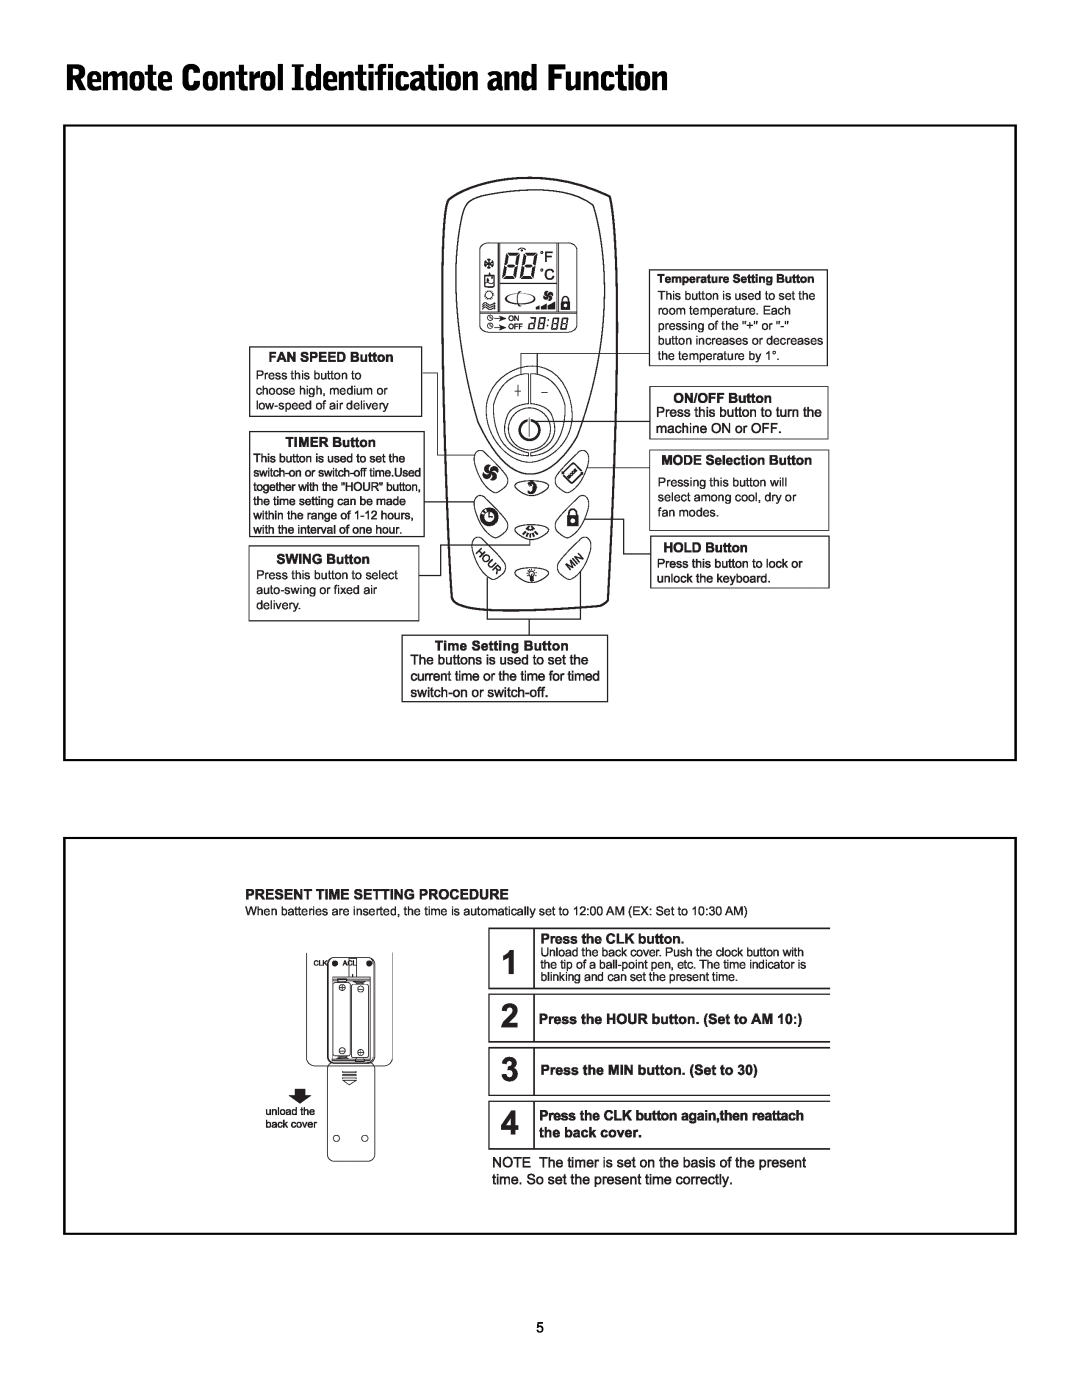 Friedrich P-09 operation manual Remote Control Identification and Function, Press the CLK button 